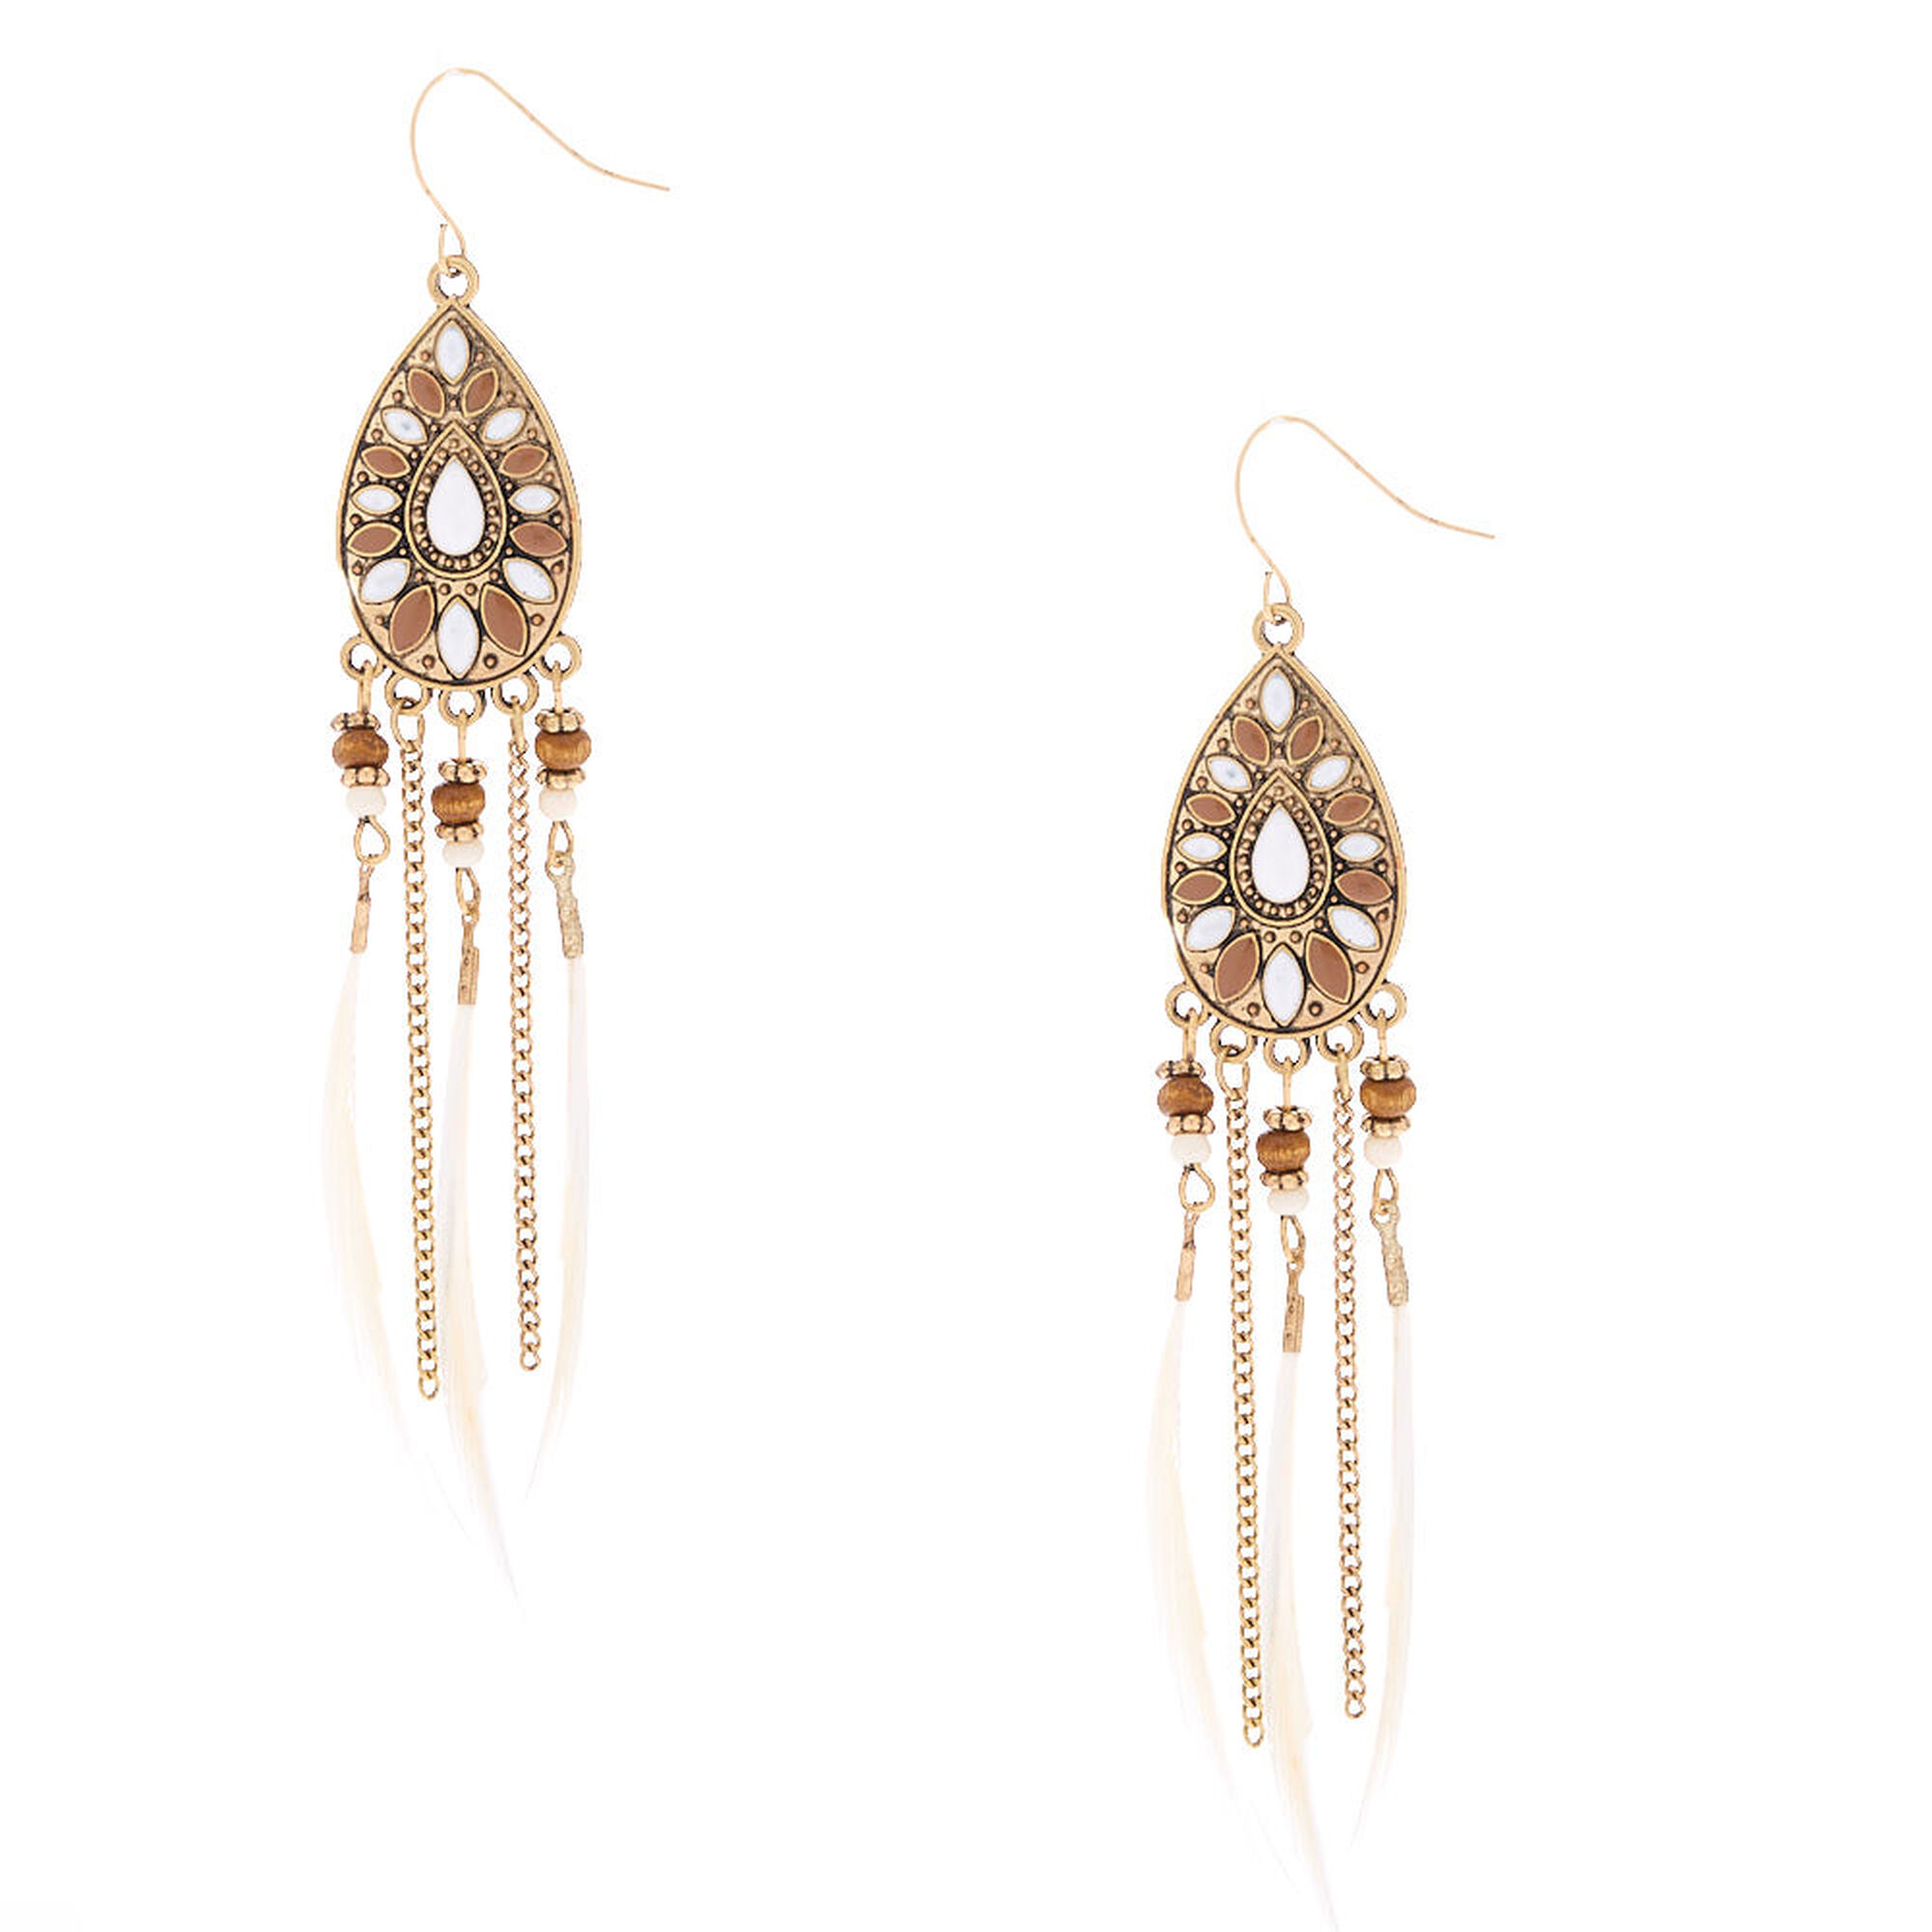 View Claires Gold 4 Beaded Feather Teardrop Drop Earrings White information